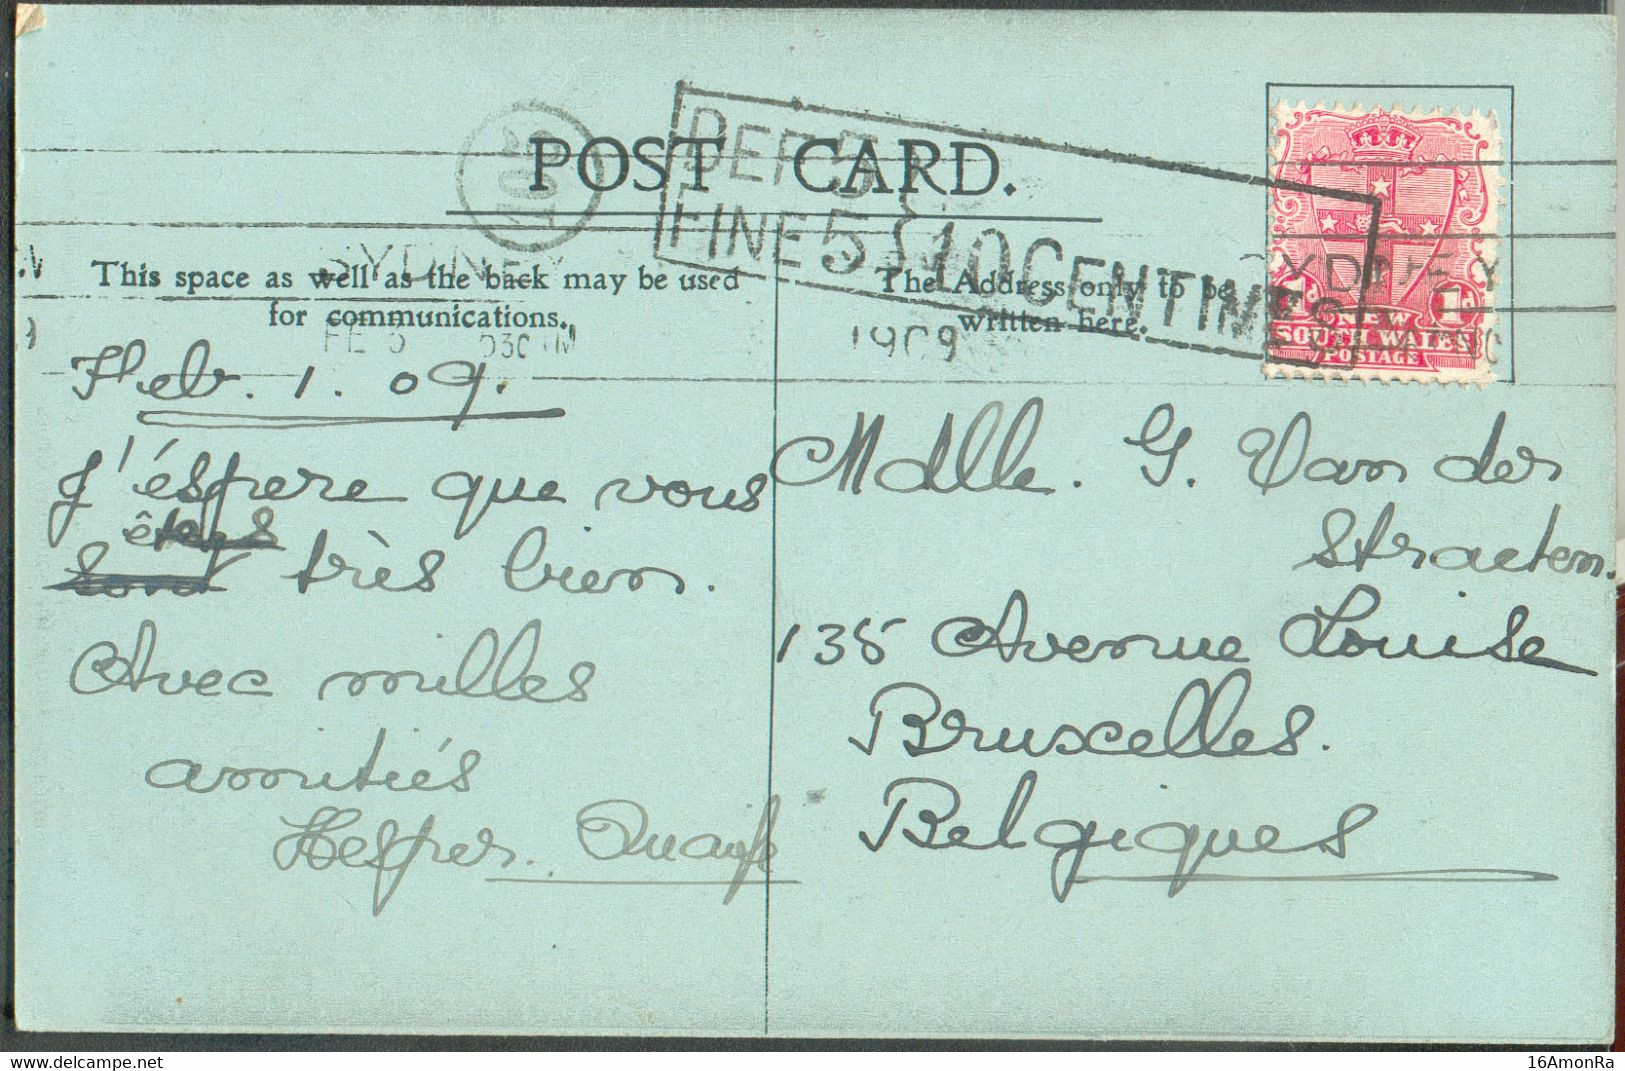 1p. Red, Cacnelled SYDNEY On PPC 1-02-1909 To Brussels (Belgium) + Hs. DEF.5/FINE 5/10 CENTIMES  - 20687 - Lettres & Documents